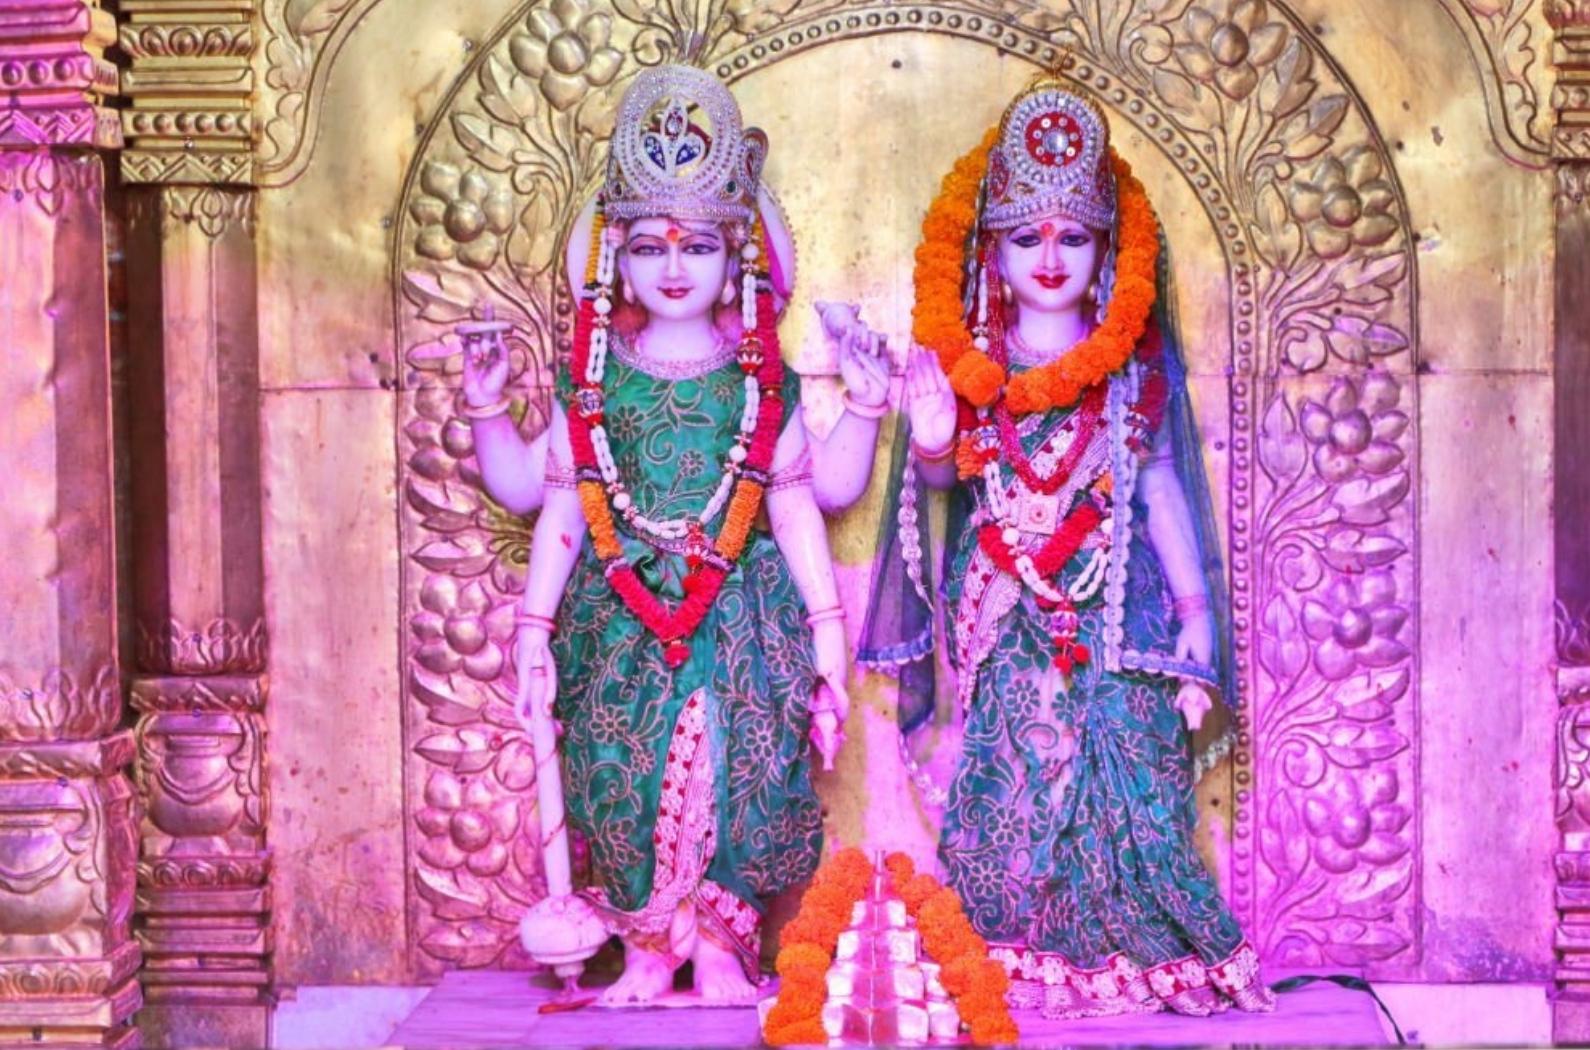 Idols of Lakshmi and Narayan in a Hindu temple in Pathankot, India. One of the almighty Gods in Hindu Myths.